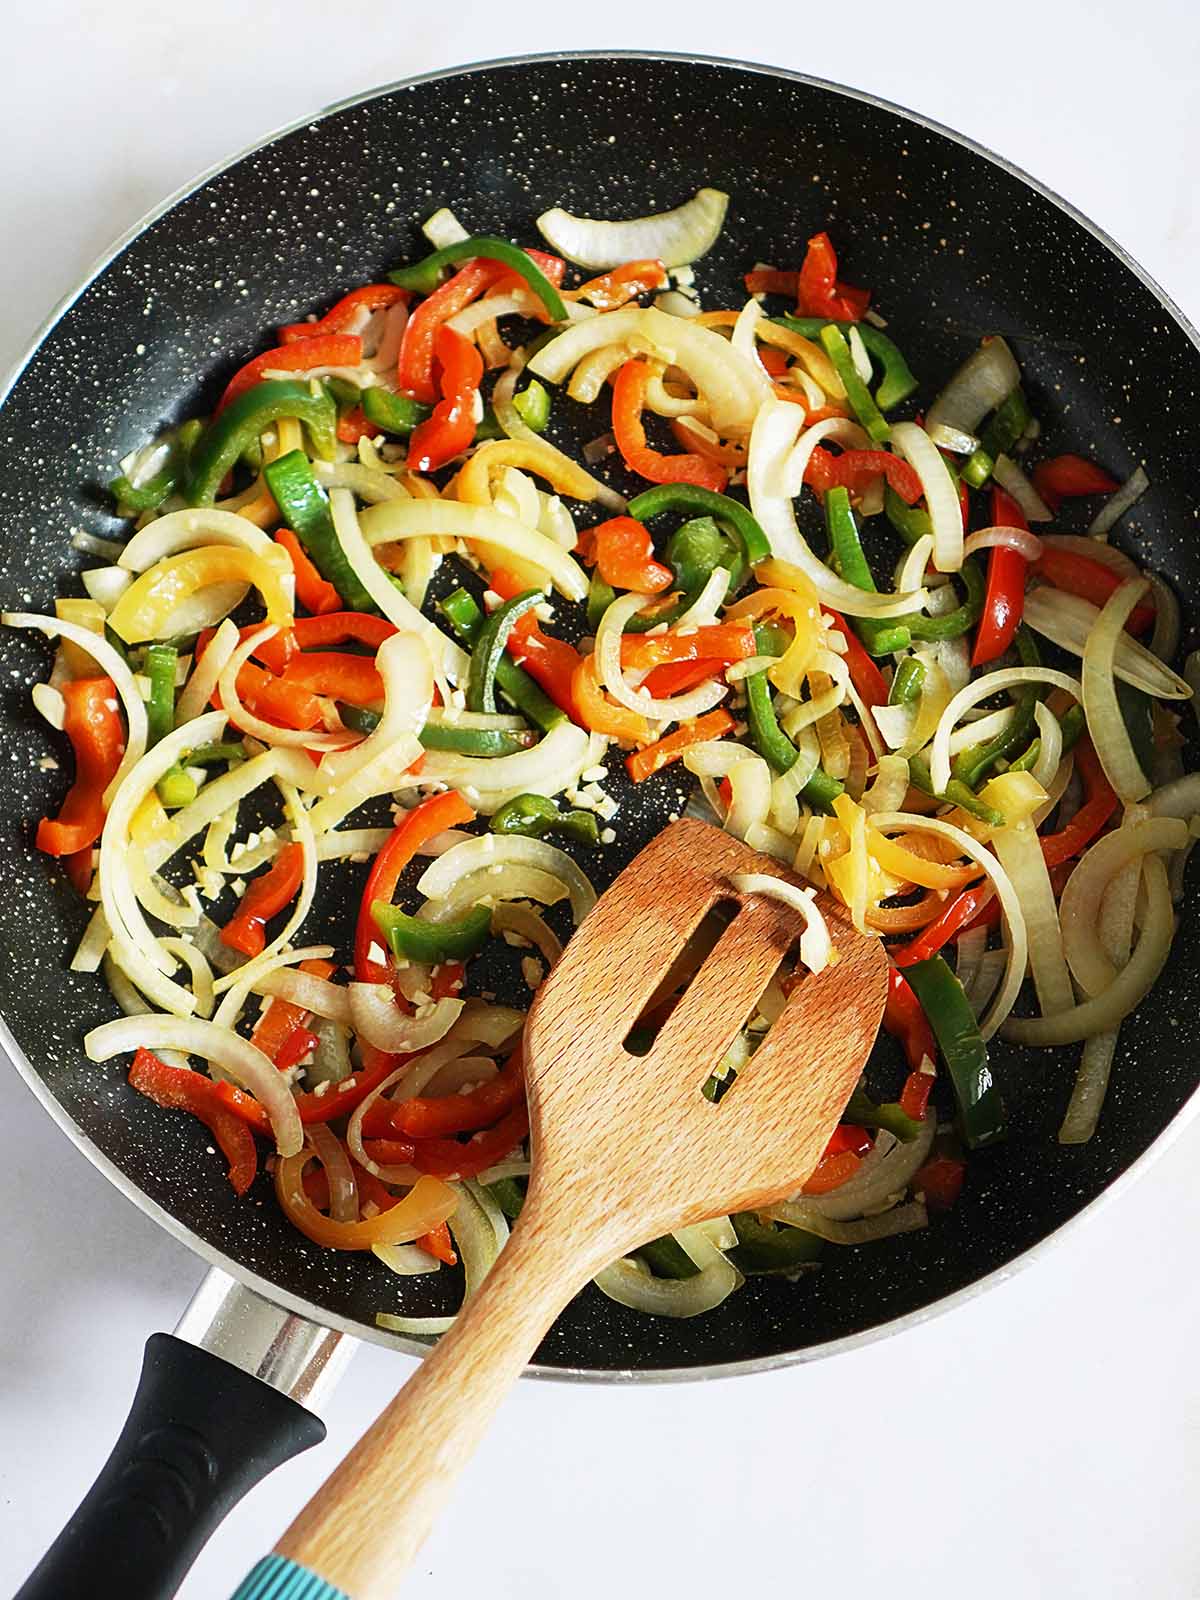 A large skillet sauteing onions and peppers.